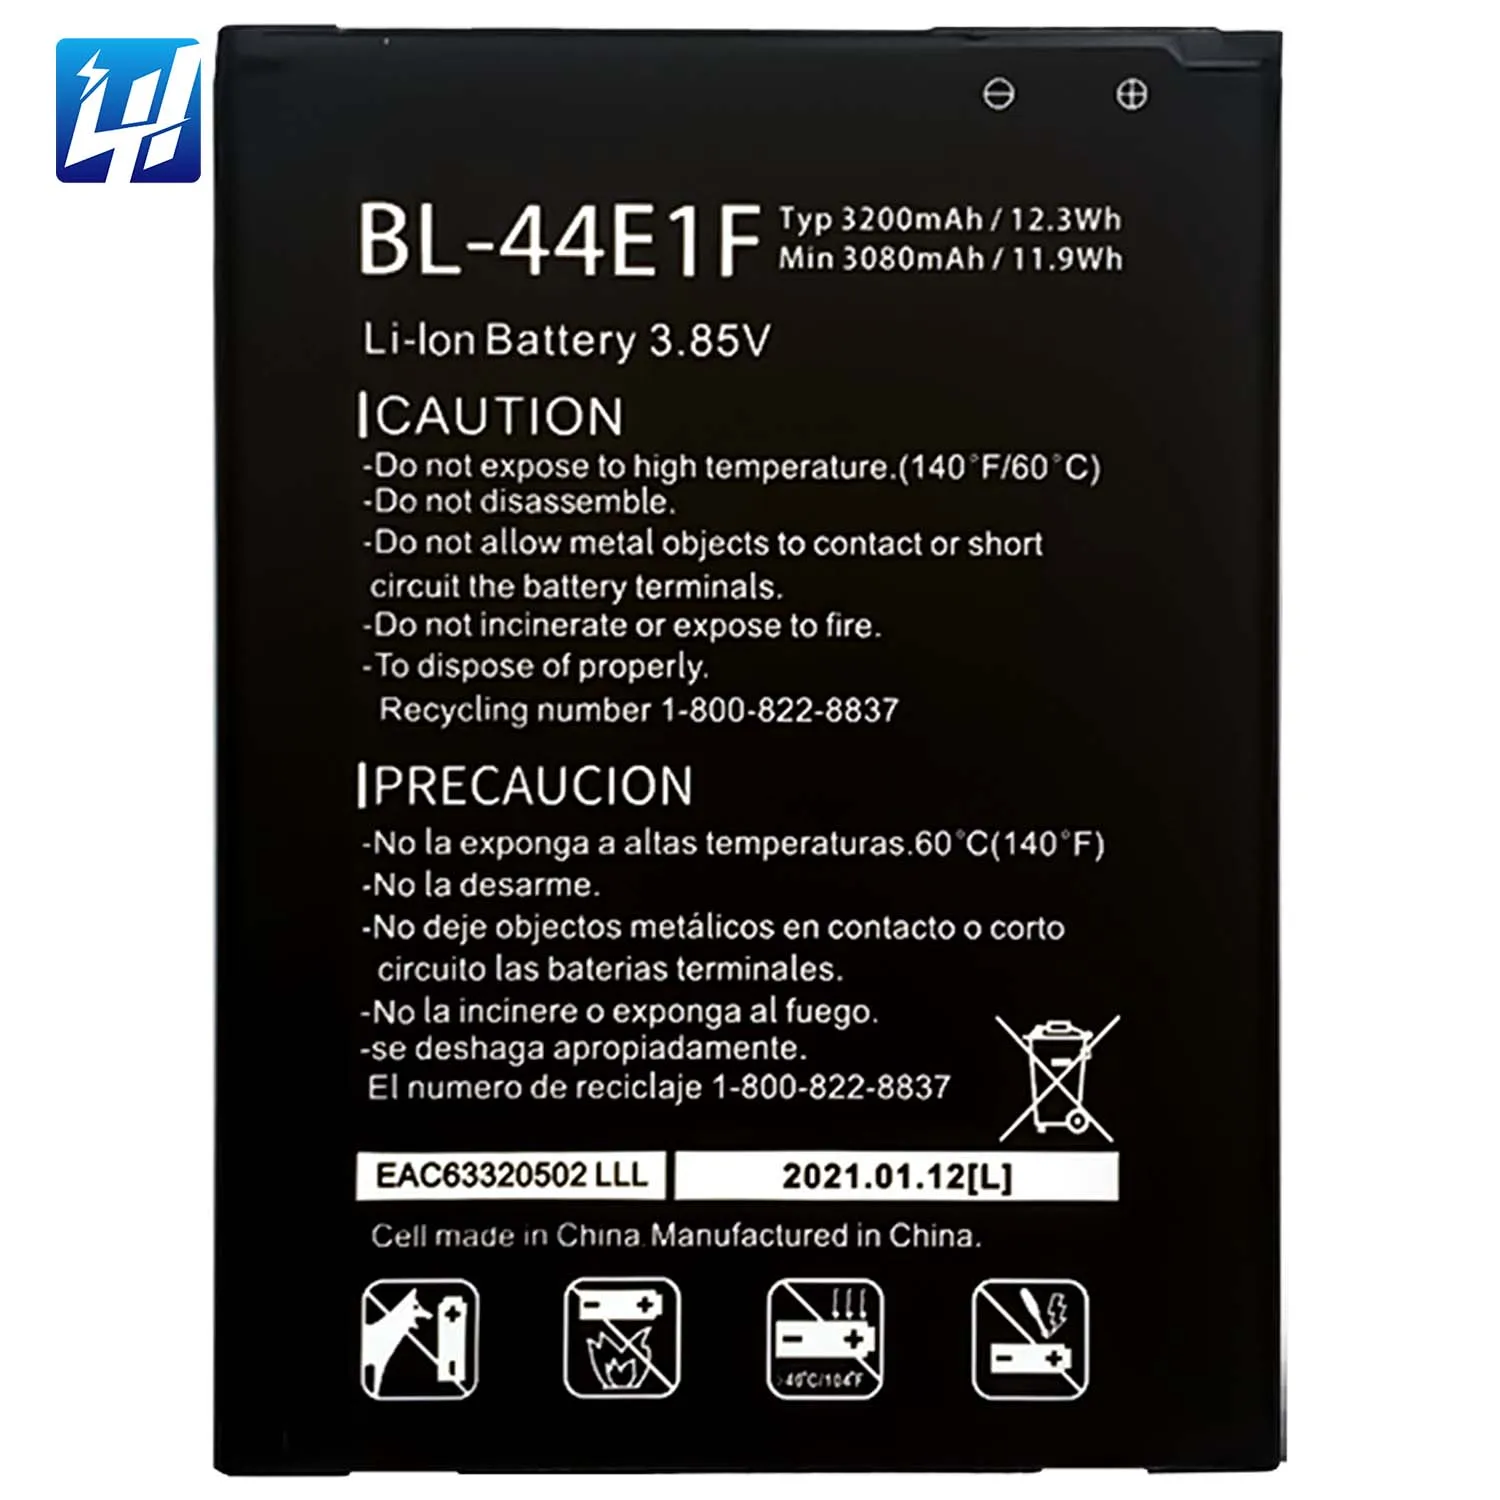 

BL-44E1F High quality mobile phone battery for LG V20 H990 H918 H910 LS997 US996 VS995 F800L F800S F800K H915 H910PR